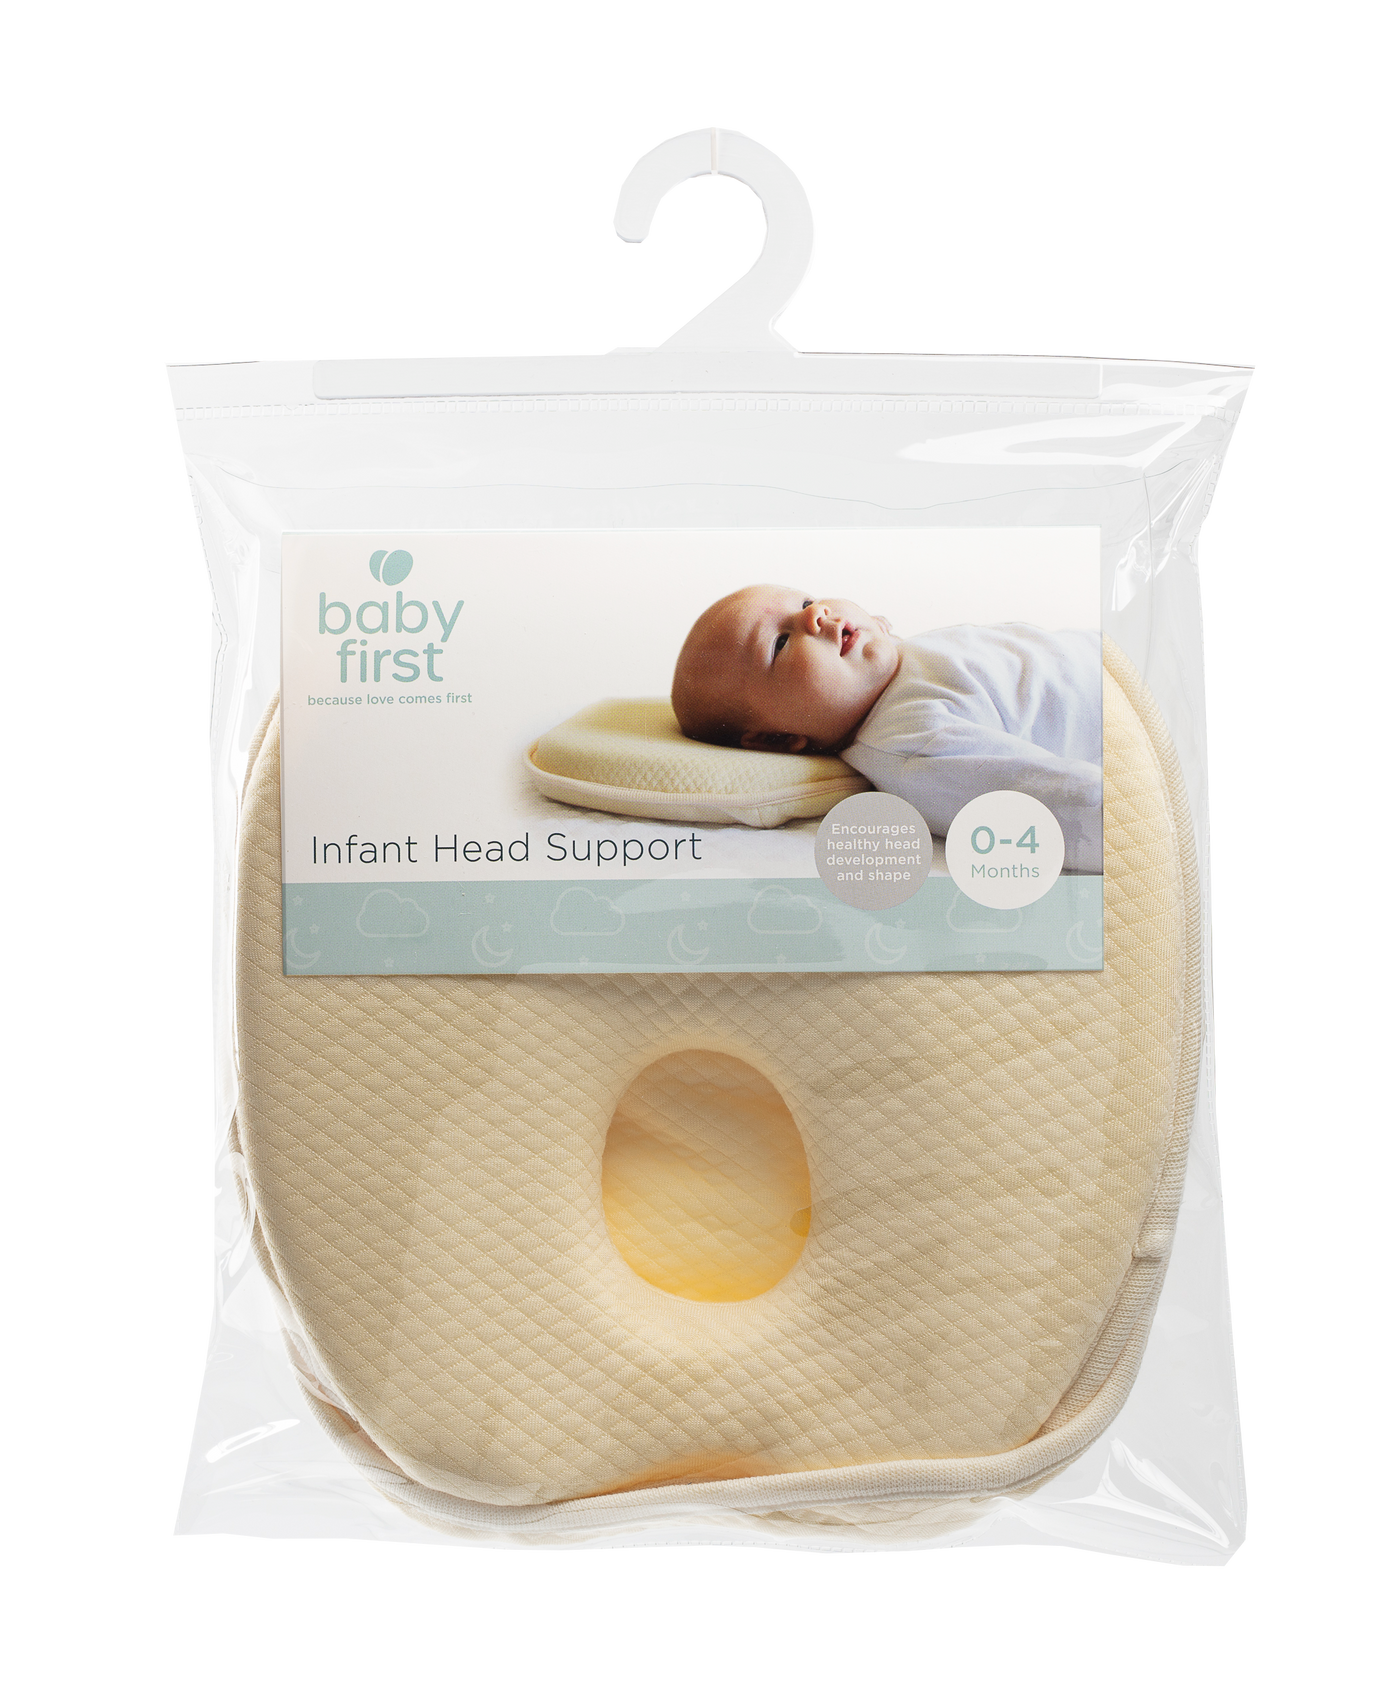 Infant Head Support with pillowcase